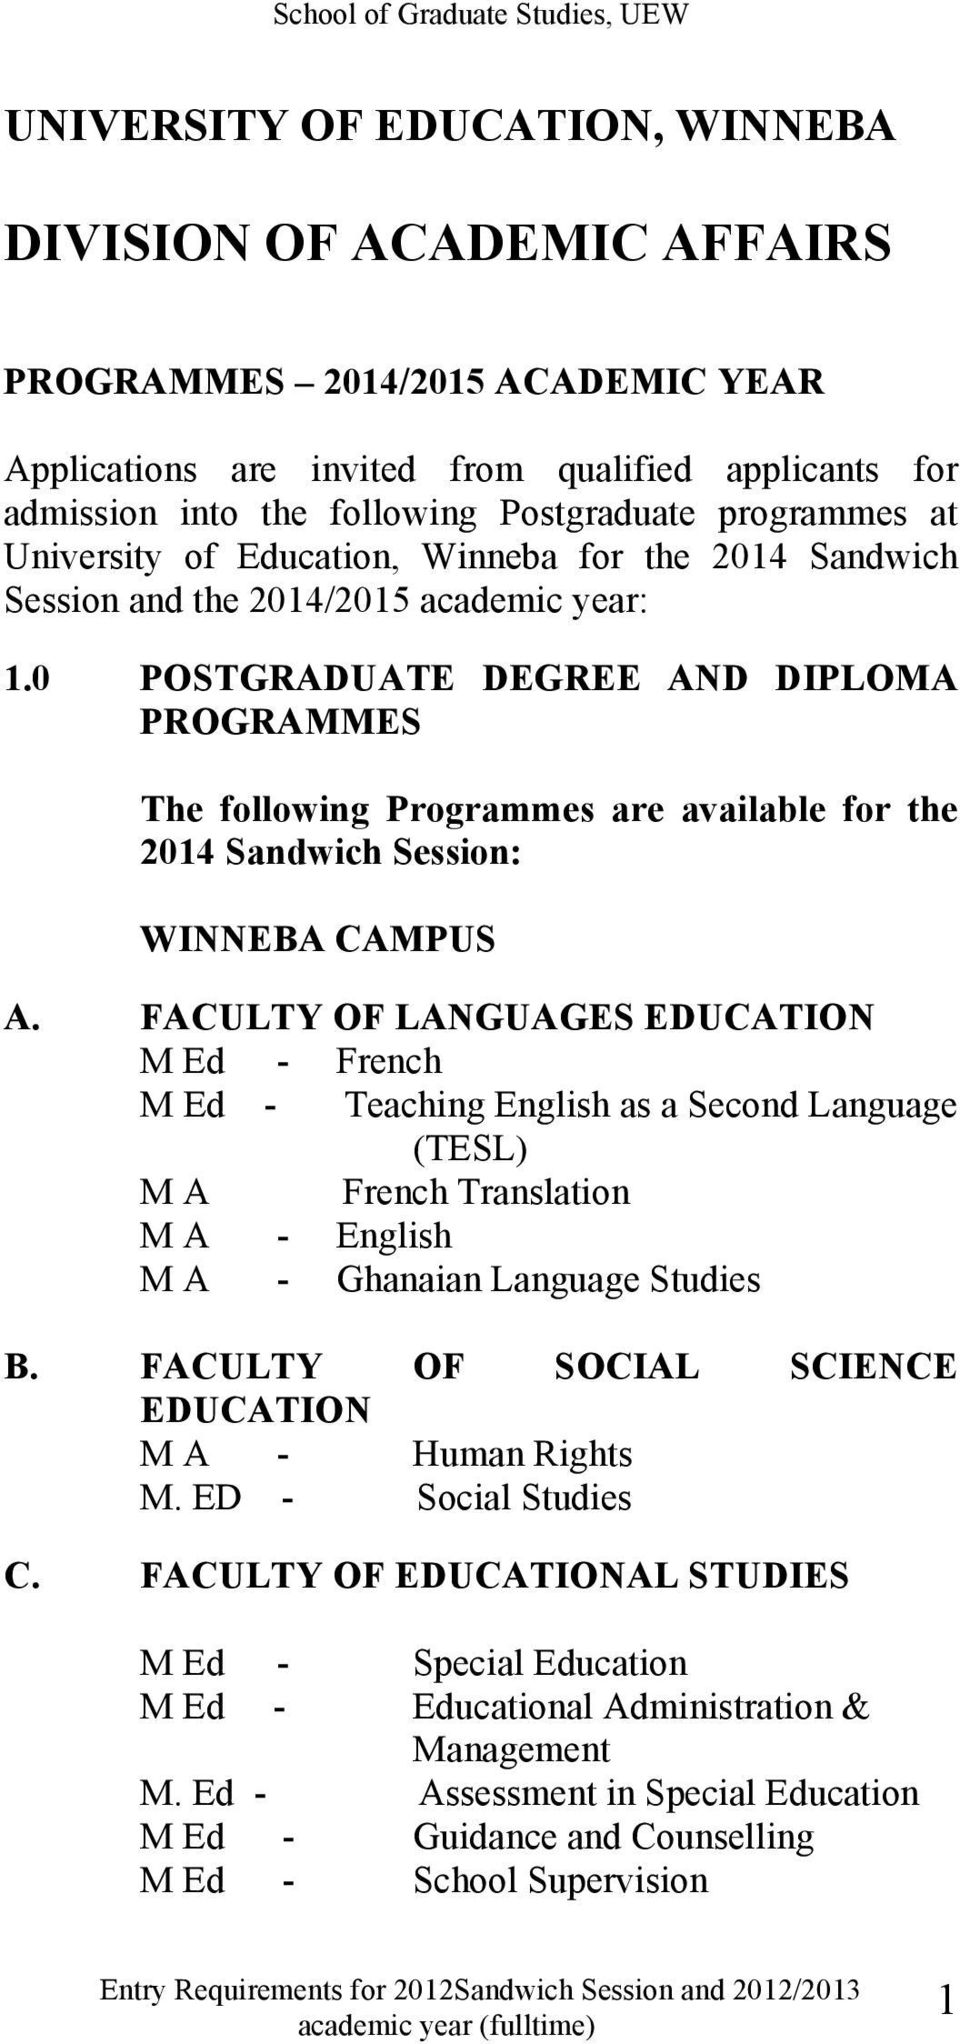 0 POSTGRADUATE DEGREE AND DIPLOMA PROGRAMMES The following Programmes are available for the 2014 Sandwich Session: WINNEBA CAMPUS A.